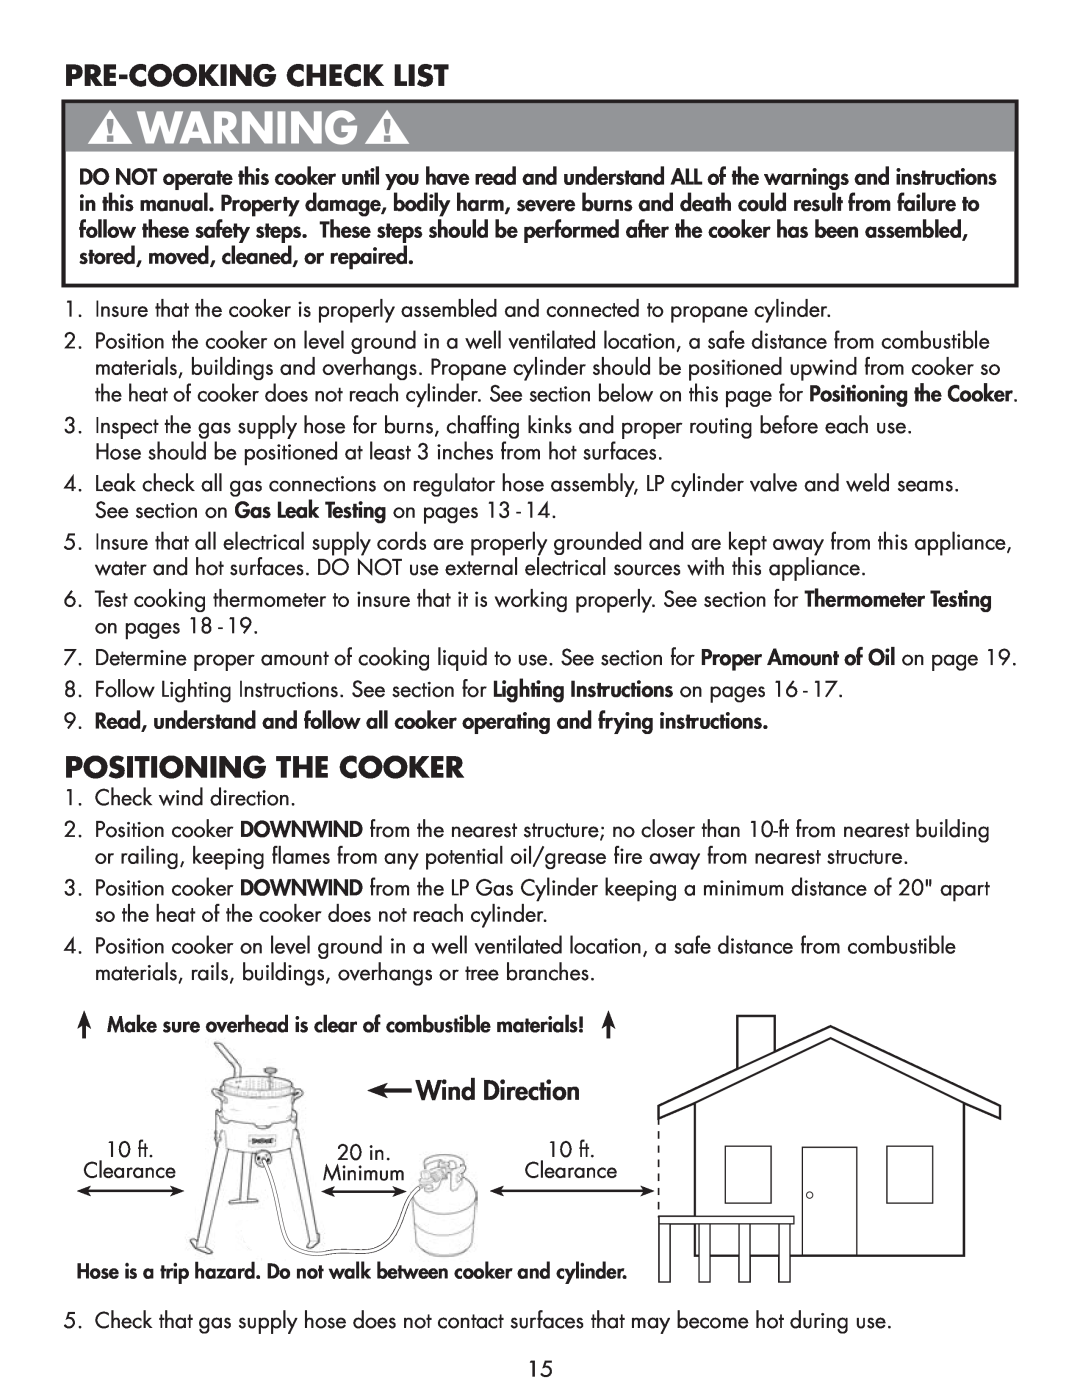 Bayou Classic 2212 owner manual Pre-Cooking Check List, Positioning The Cooker, Wind Direction 